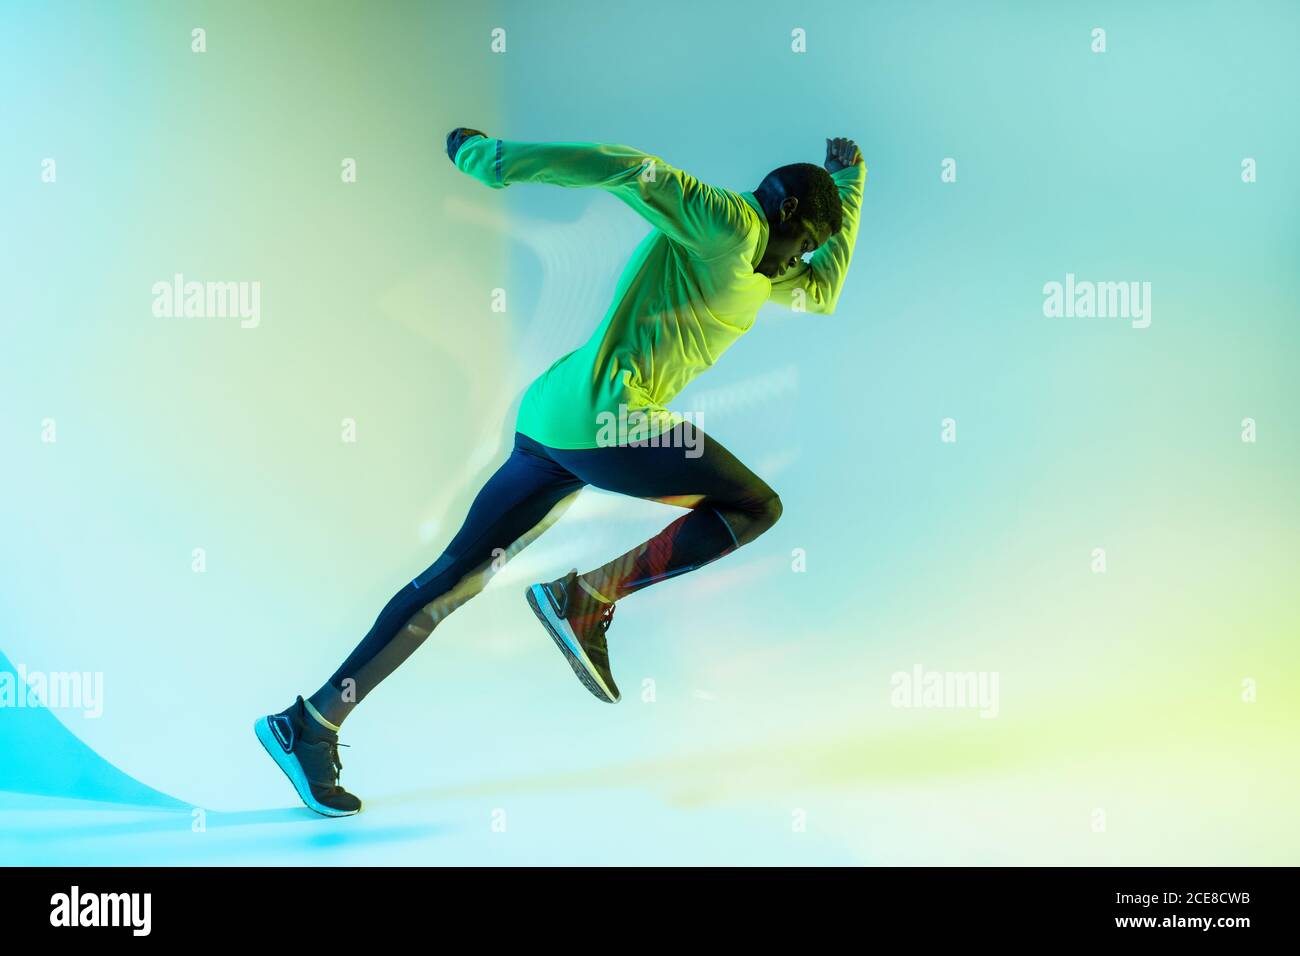 Full body side view of young African American male runner in colorful tracksuit sprinting from start position in studio with bright neon illumination Stock Photo